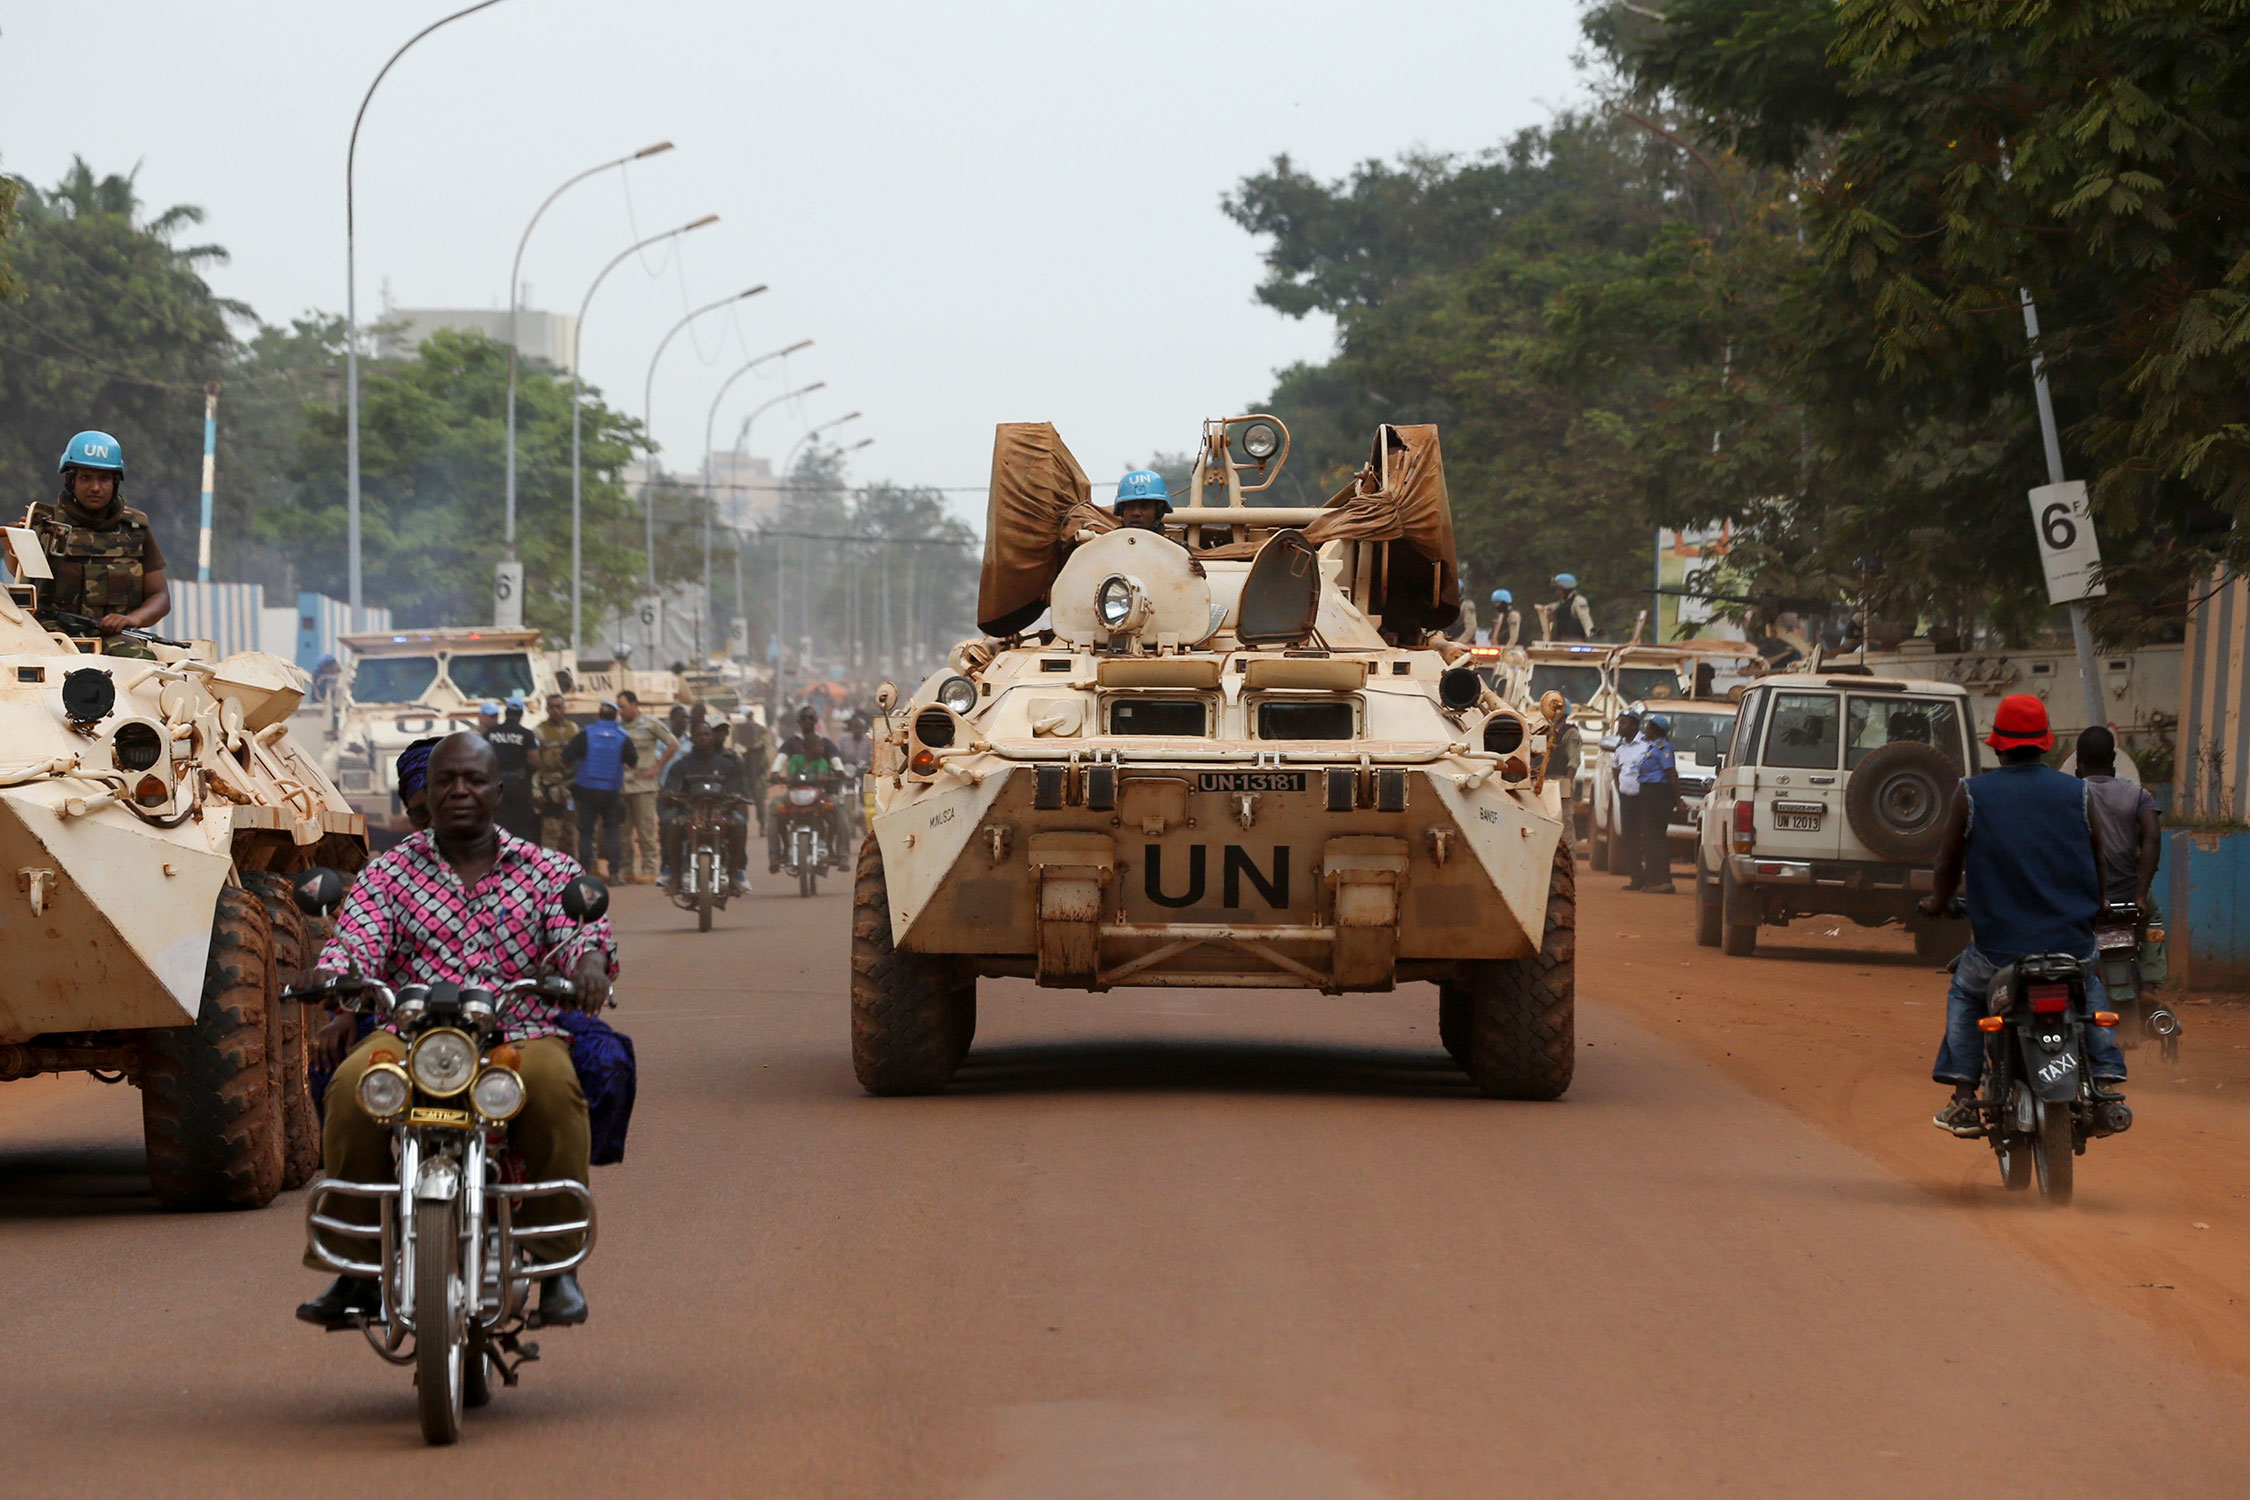 Minusca peacekeepers in Bangui, central African Republic